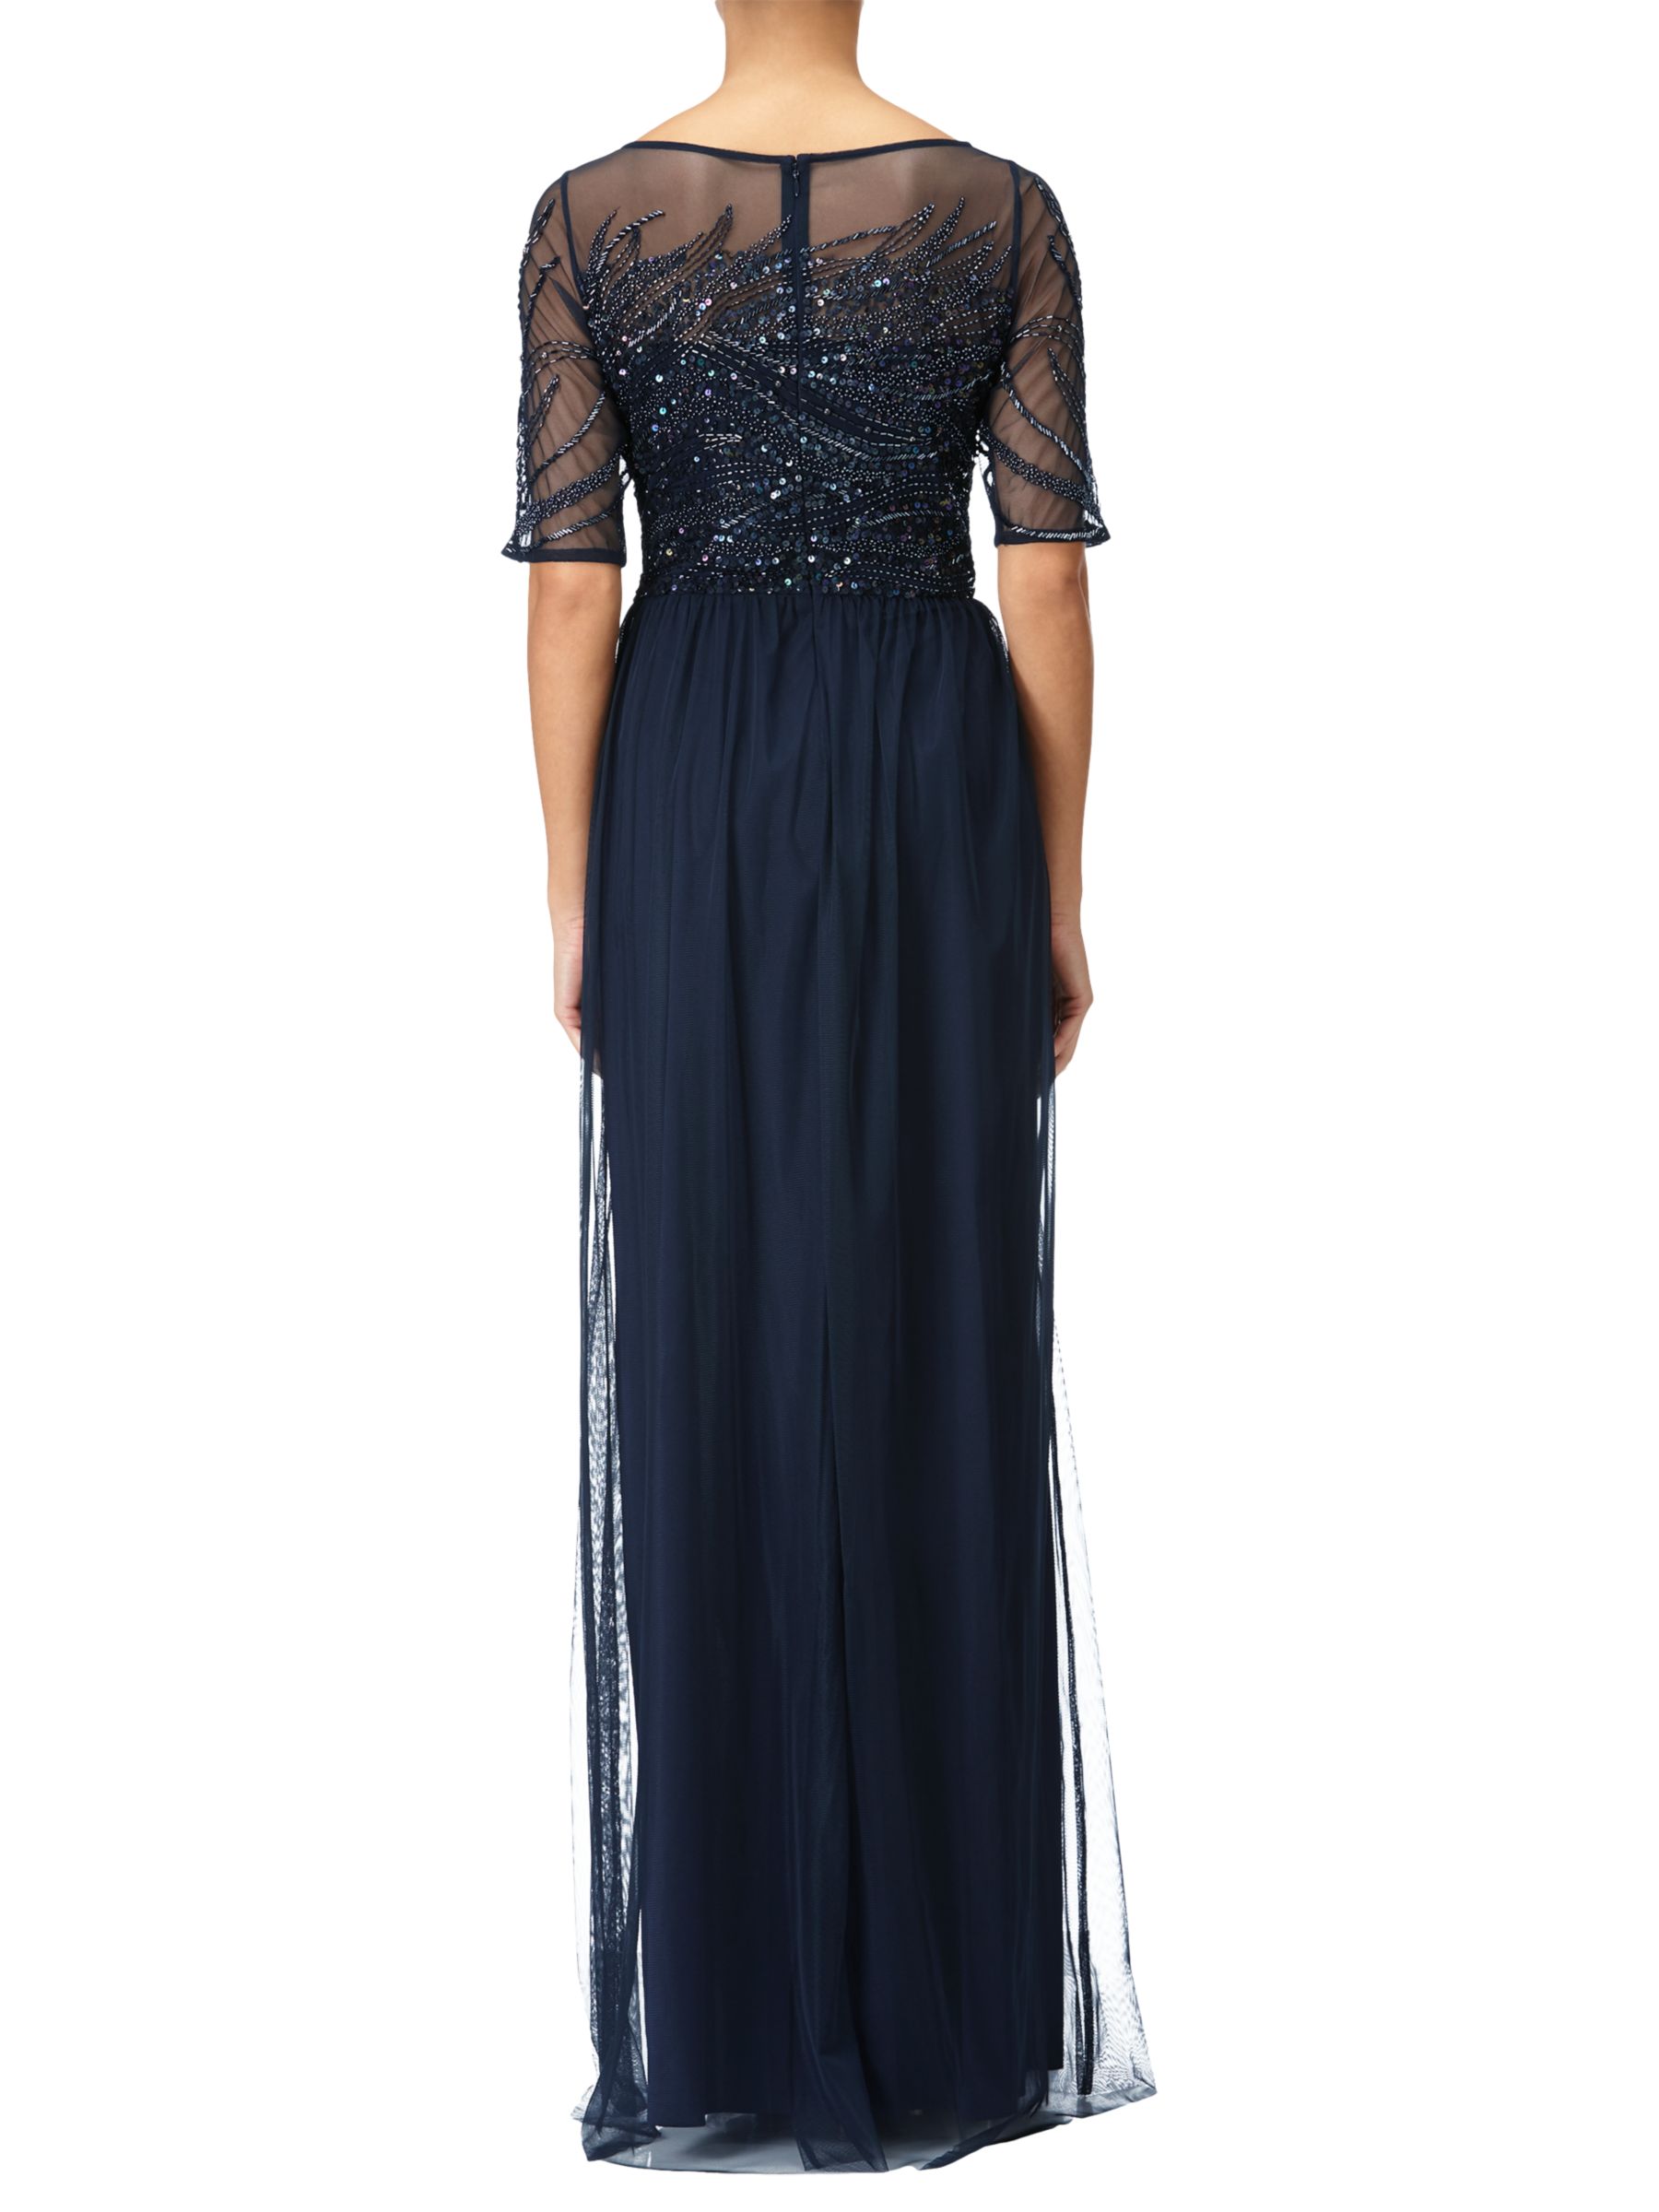 Adrianna Papell Petite Sequin Beaded Bodice Tulle Gown, Midnight